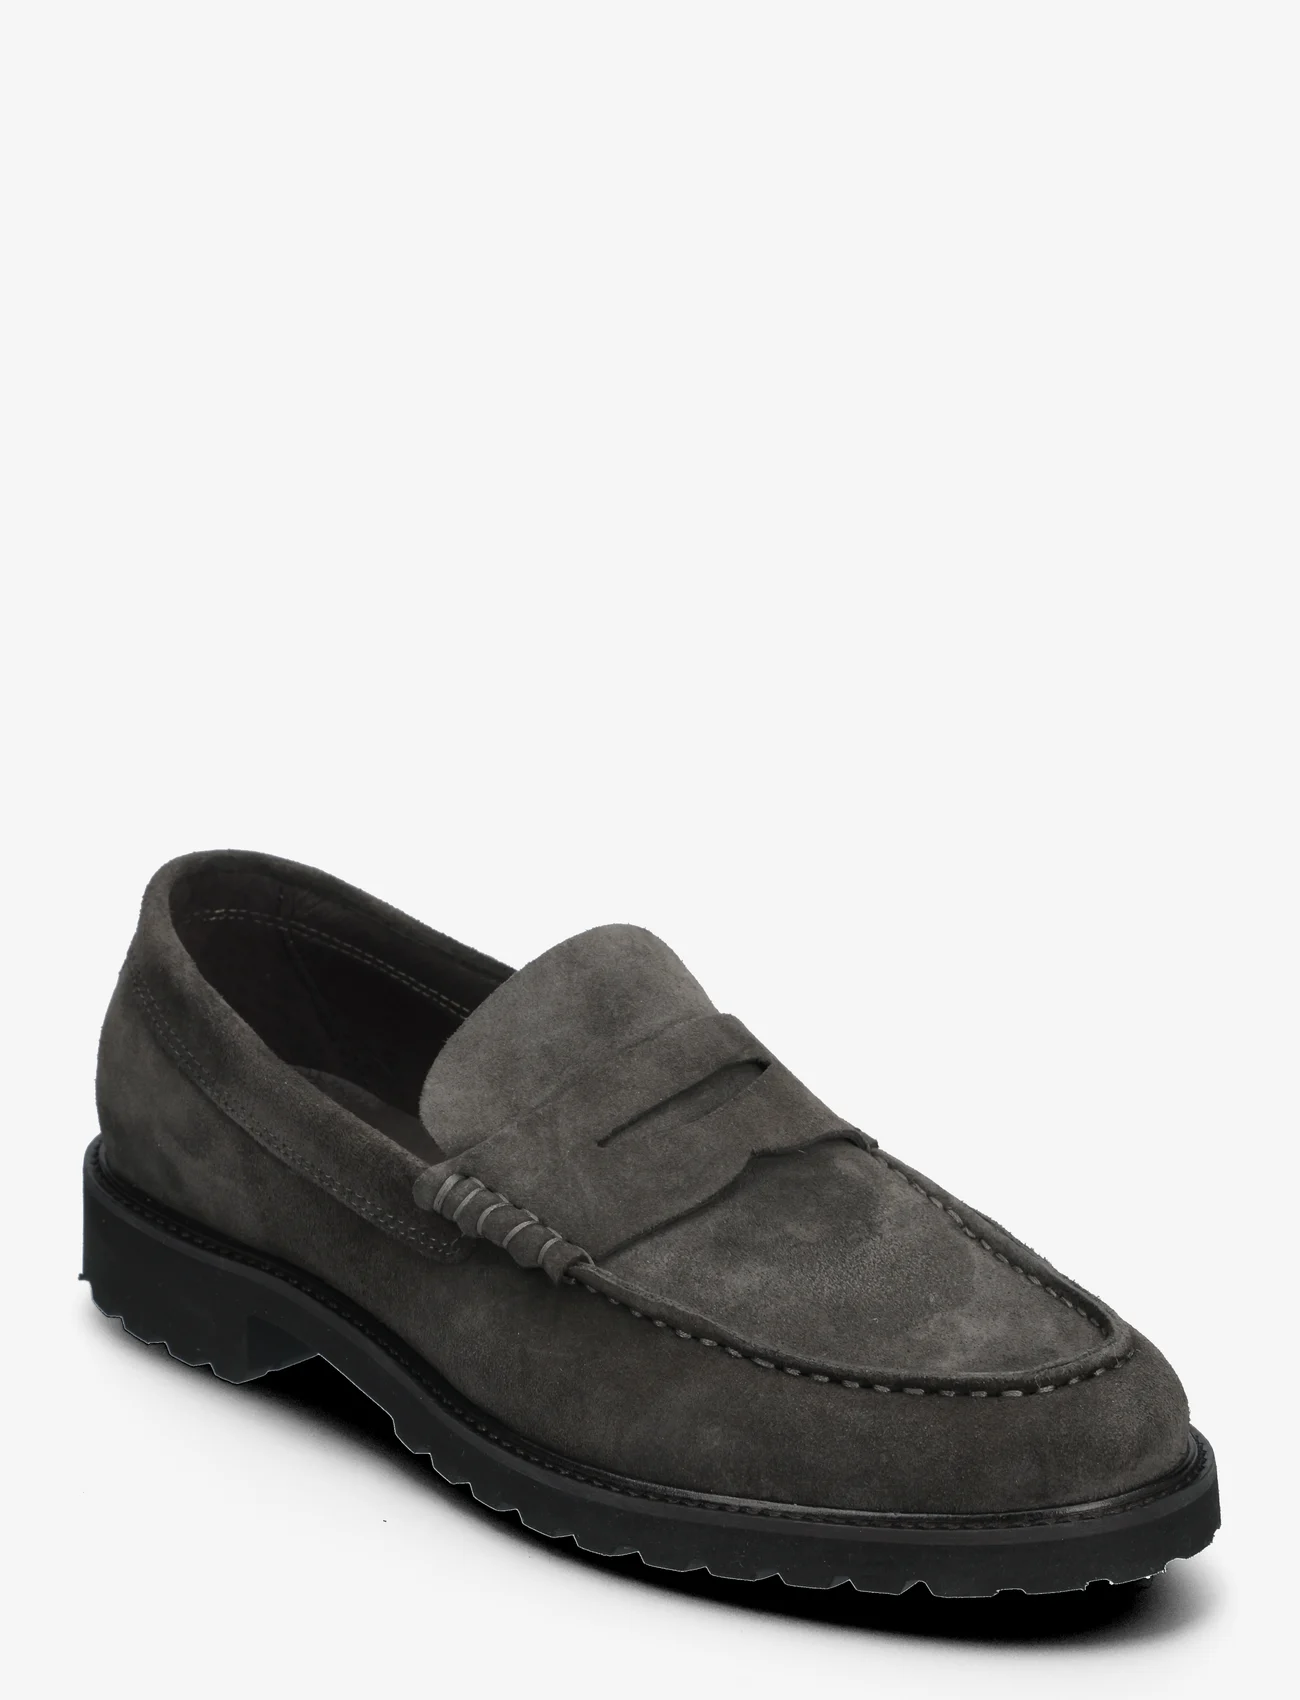 Garment Project - Penny Loafer - Charcoal Suede - nordic style - charcoal - 0